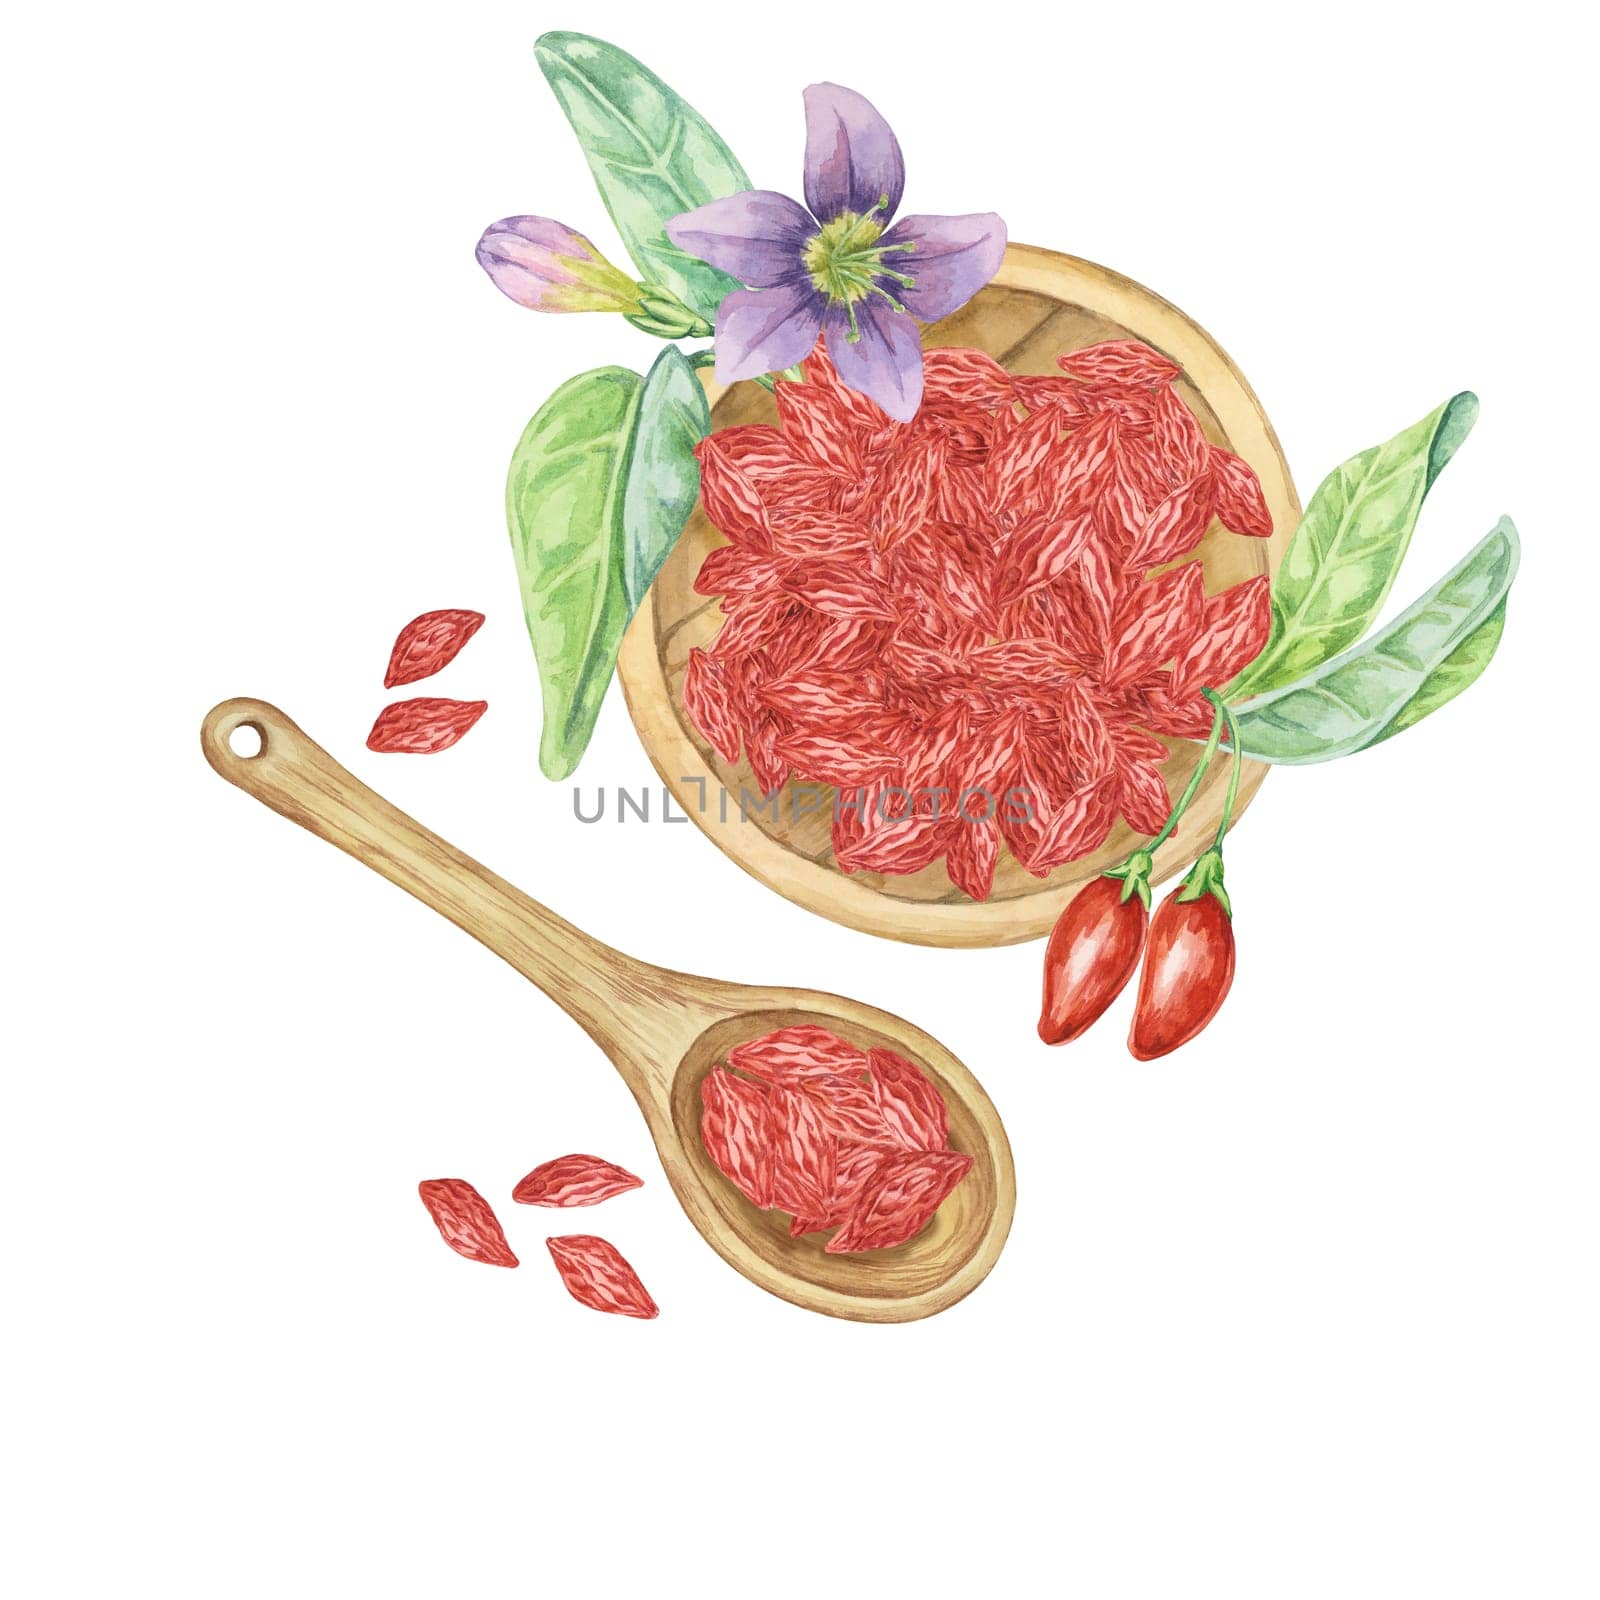 Spoon and plate with goji berries by Fofito